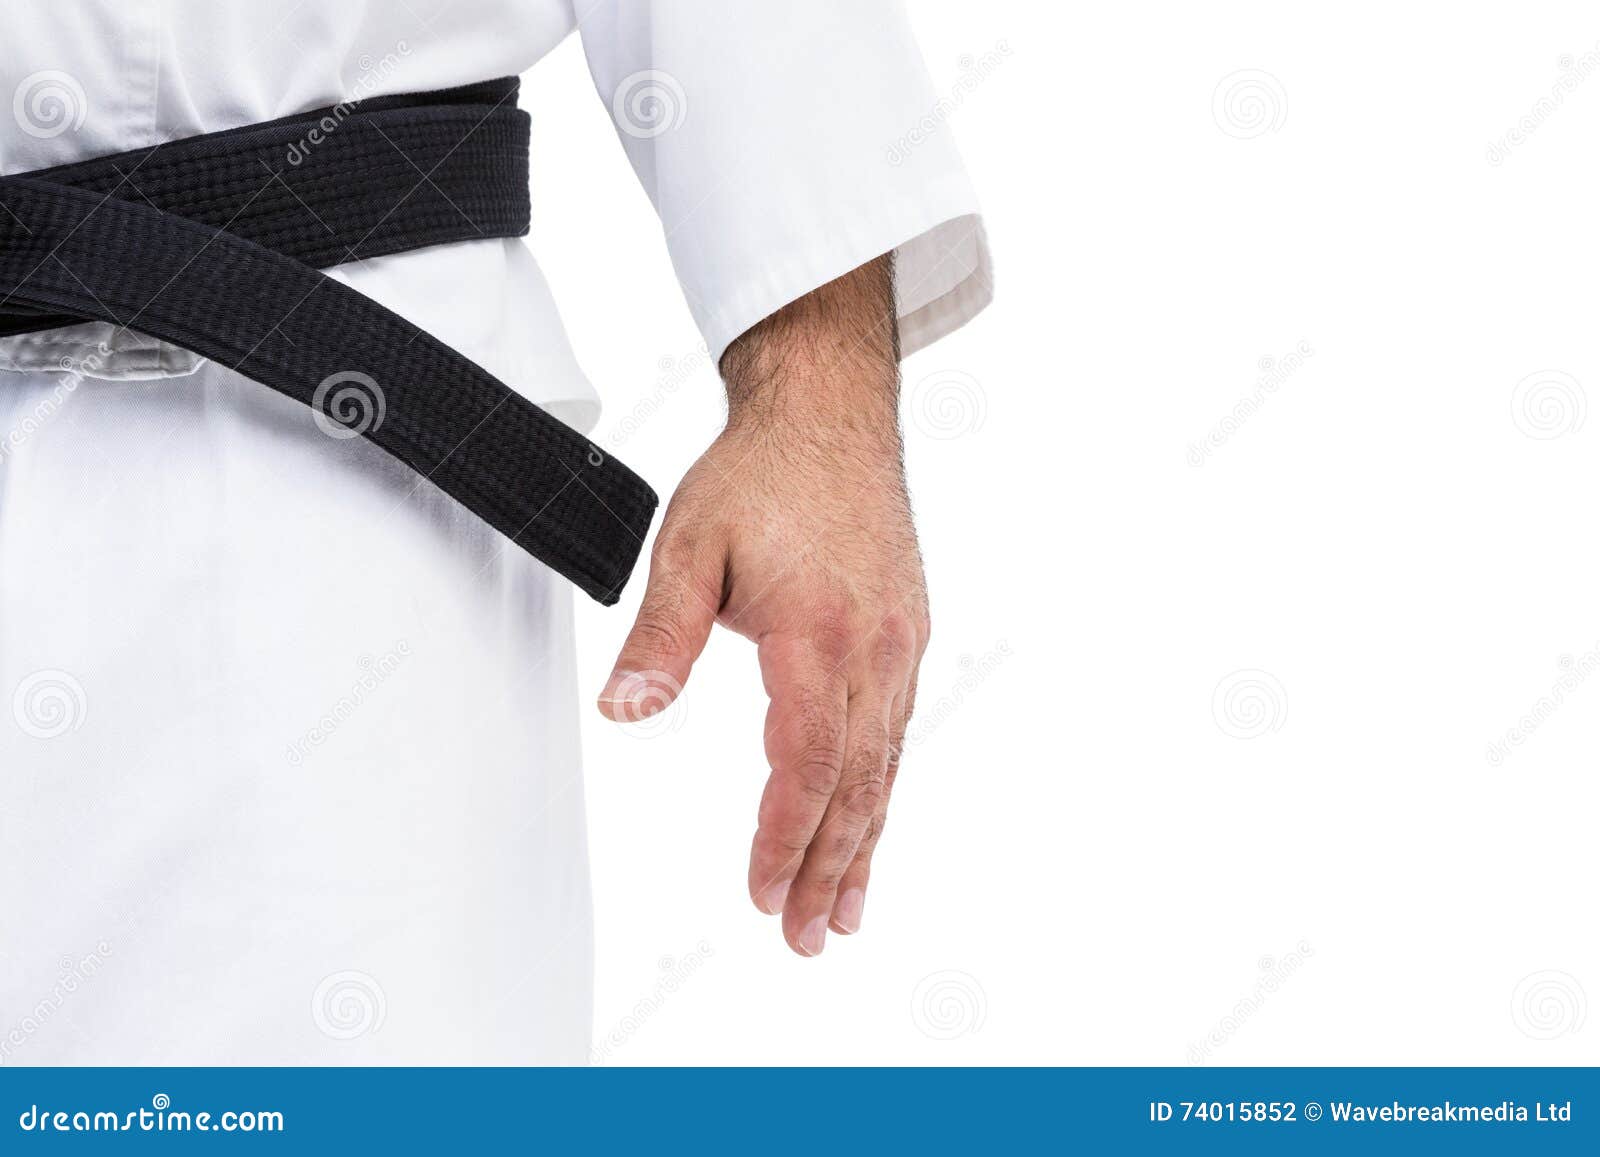 First Degree Black Belt Stick Fighting. Stock Photo, Picture and Royalty  Free Image. Image 2433933.